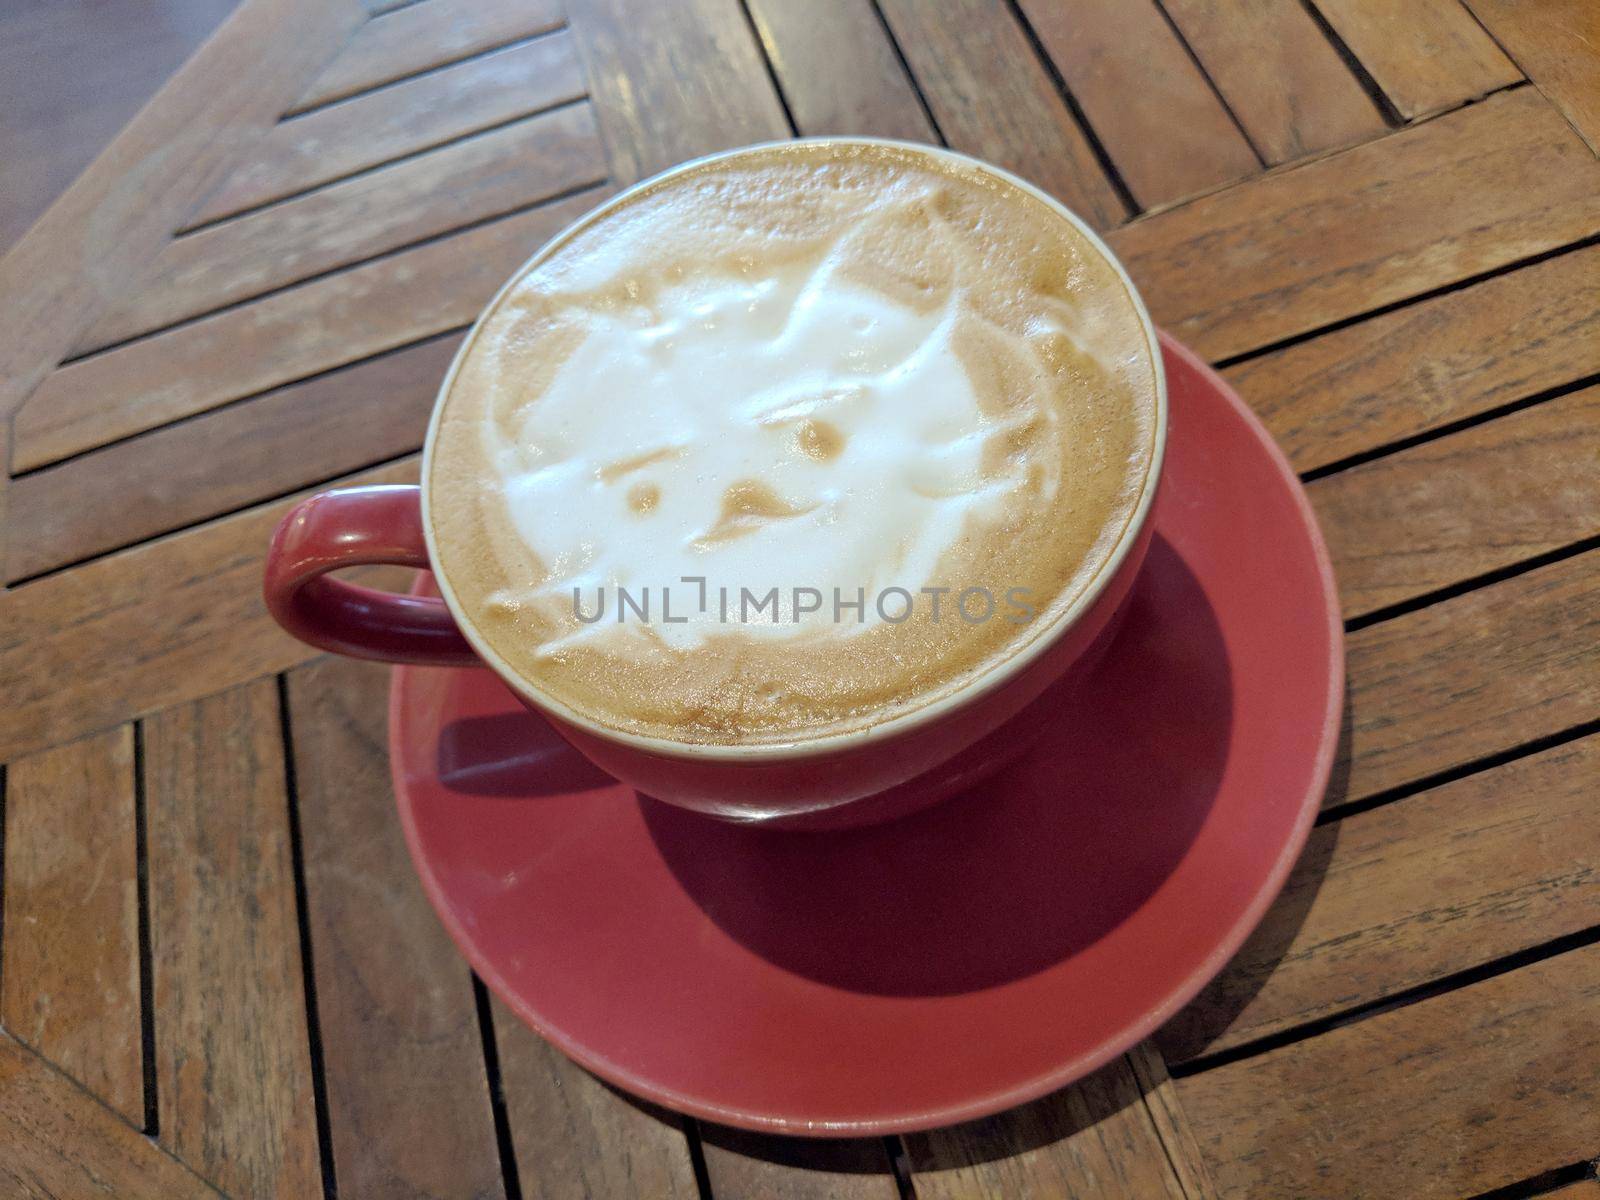 Red cup of Cappuccino on saucer with a cat face pattern in foam by EricGBVD